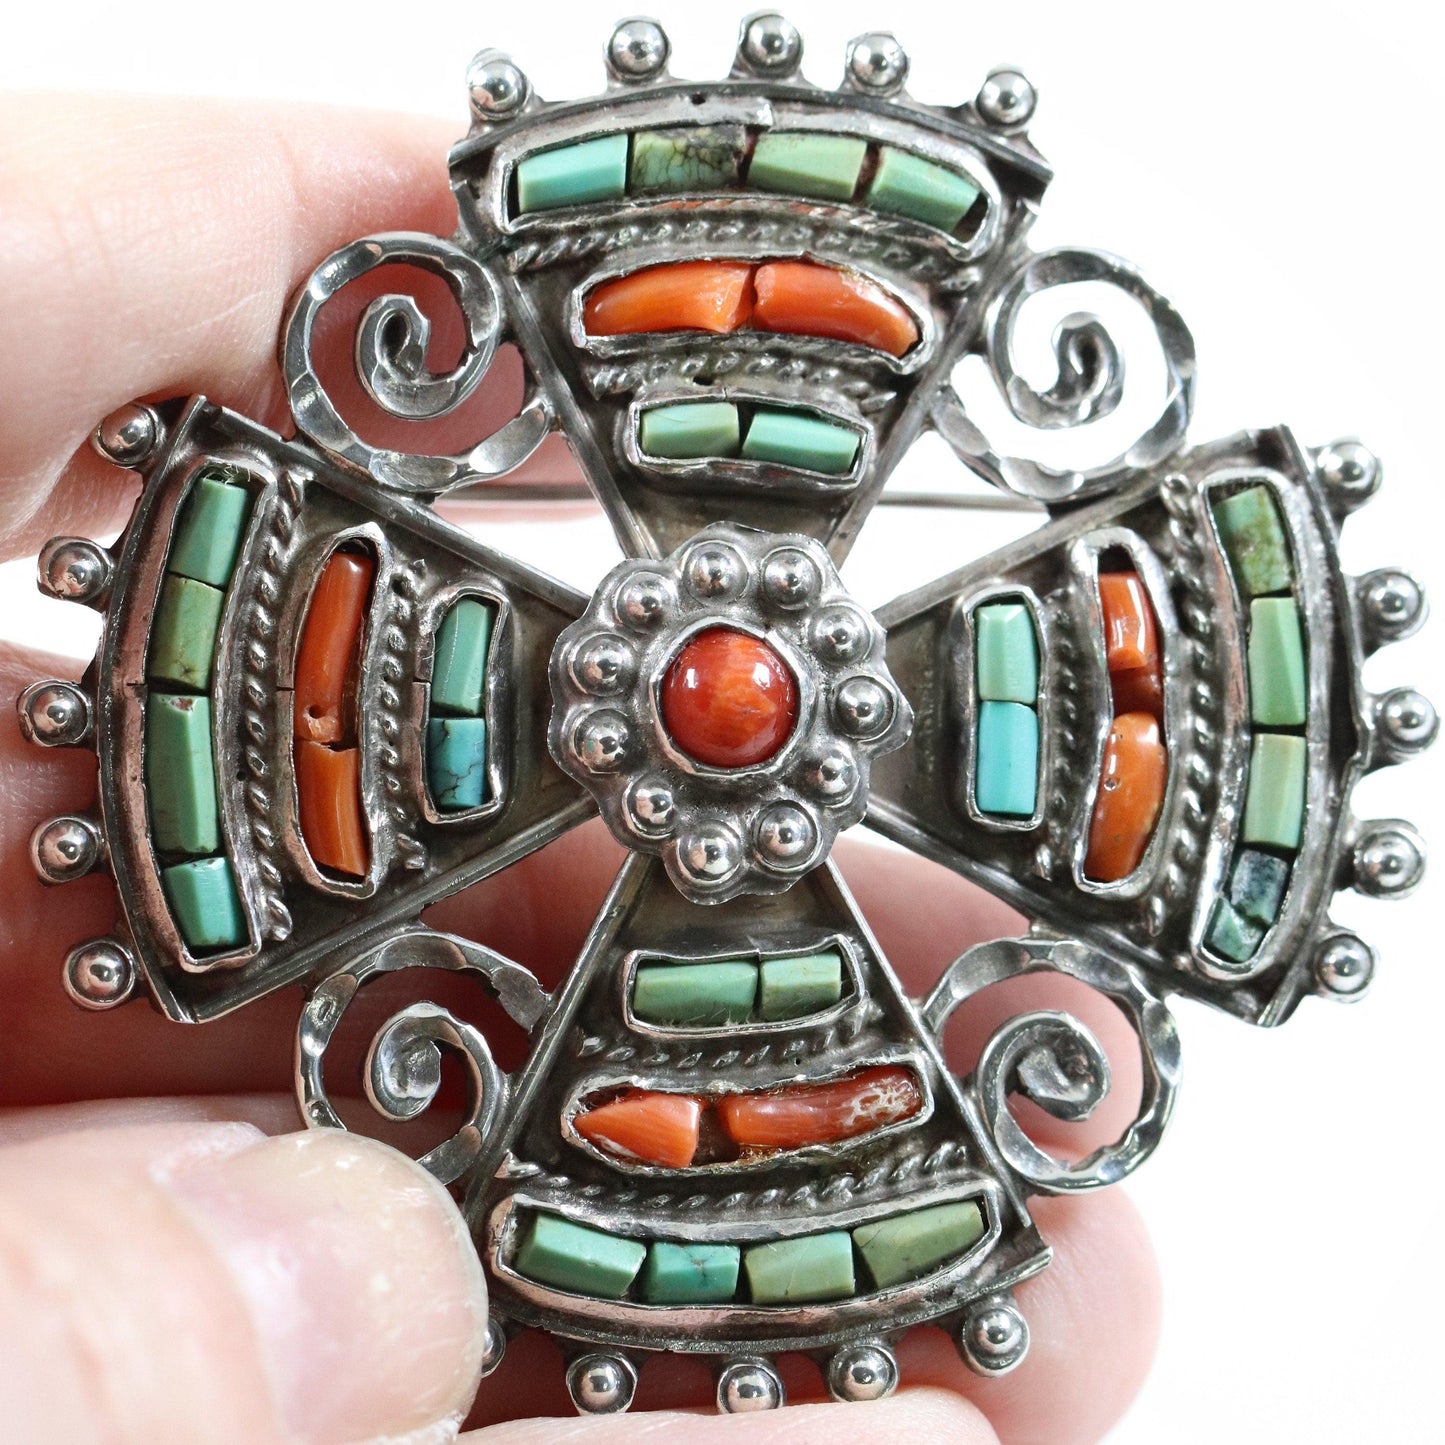 MATL Brooch | Matilde Poulat Coral and Turquoise Cross Pin | Vintage Sterling Silver Mexico - Carmel Fine Silver Jewelry